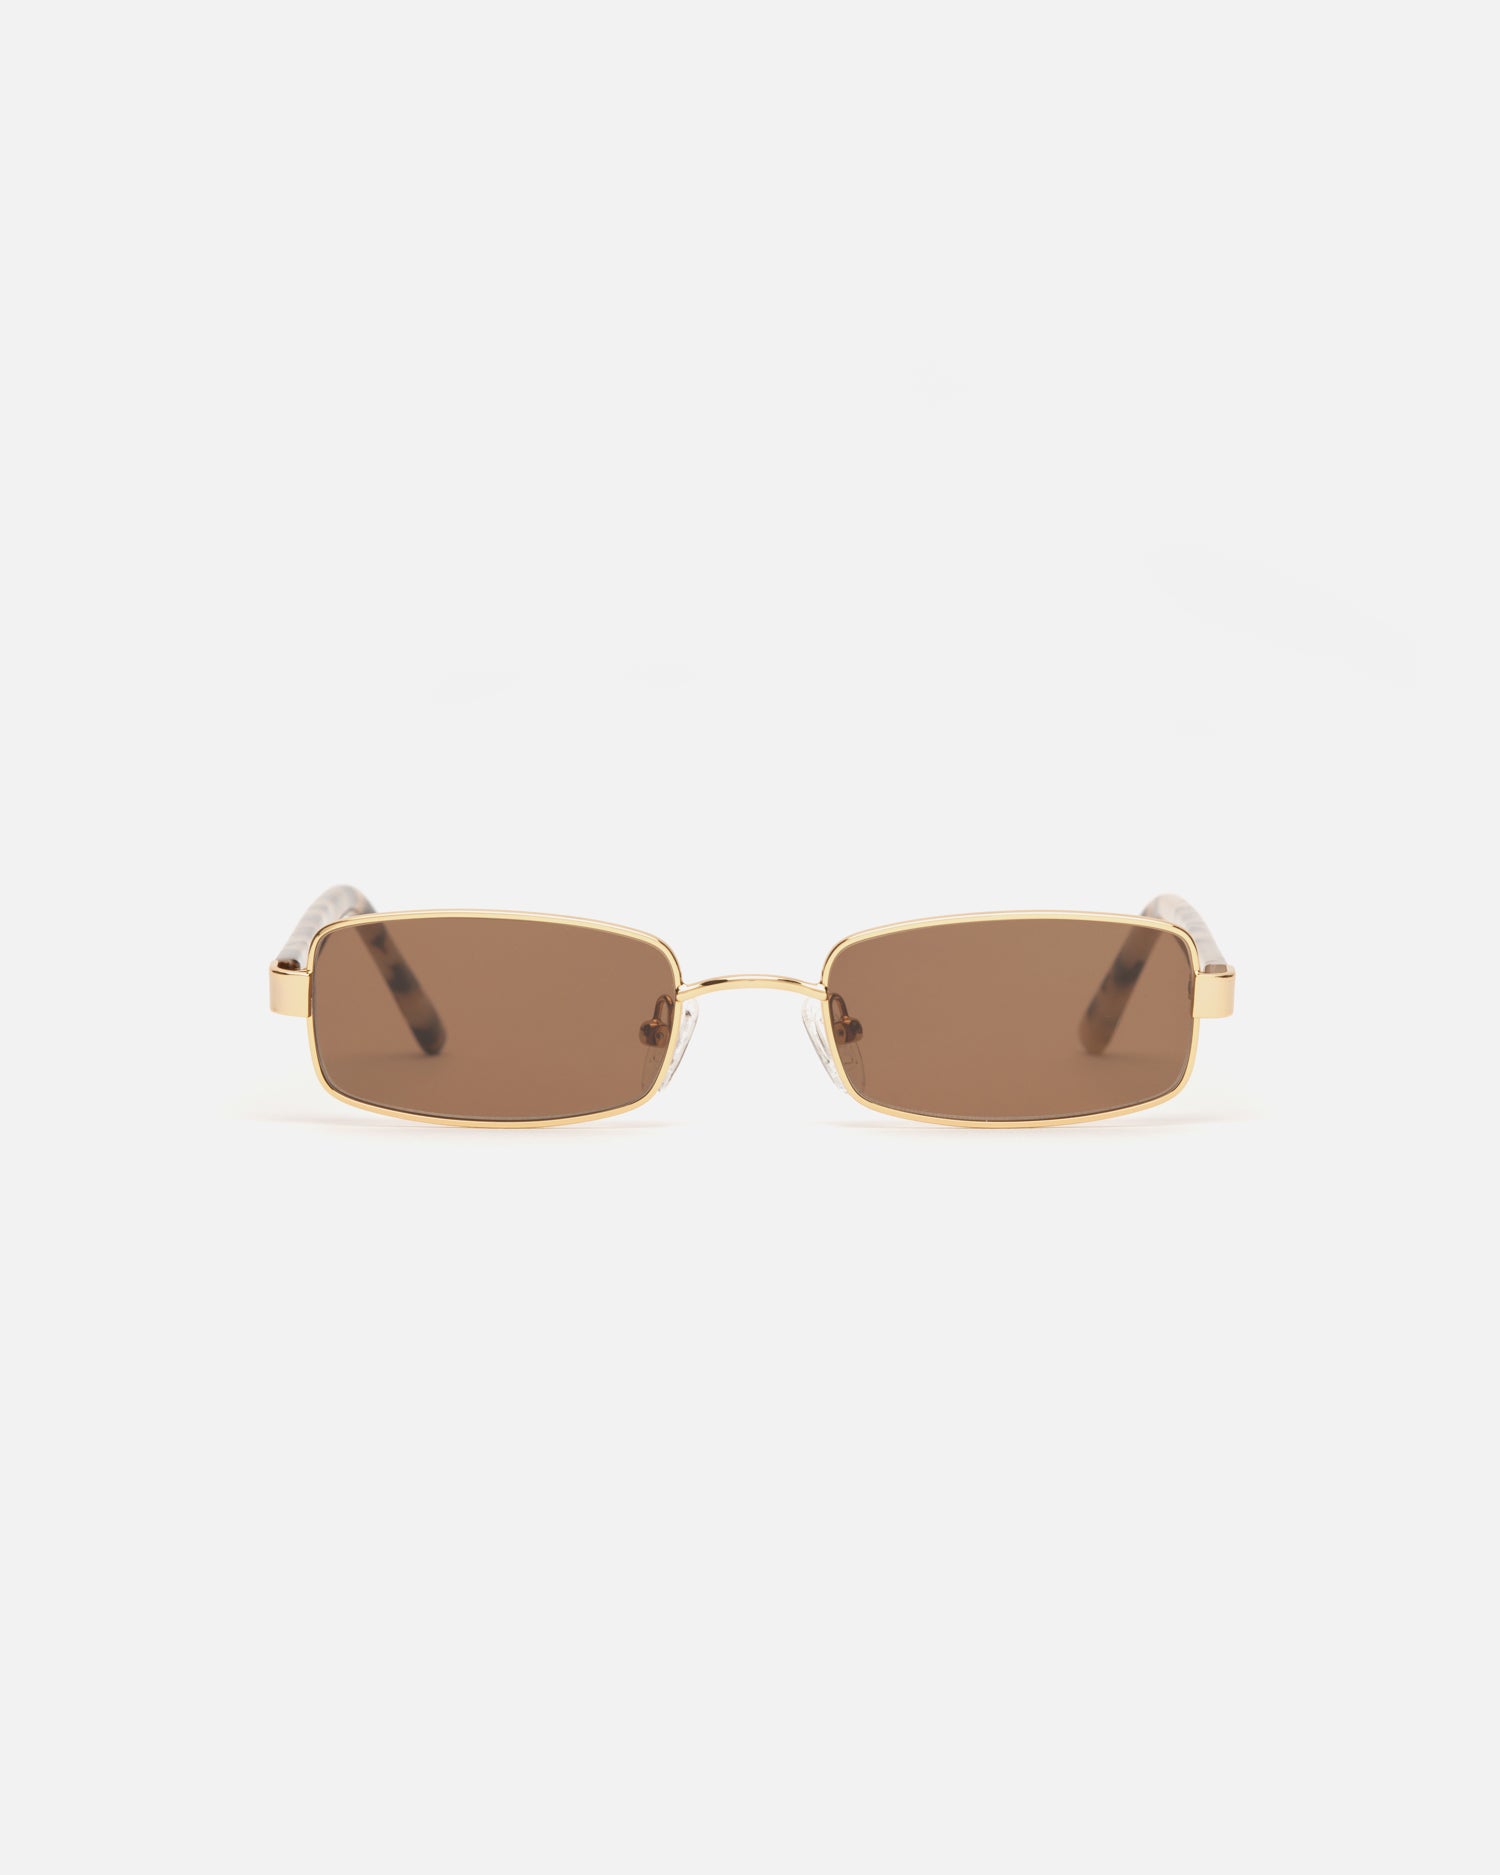 Lu Goldie Nina Gold Wire Frame Rectangle Sunglasses in Choc Tort Brown, front image